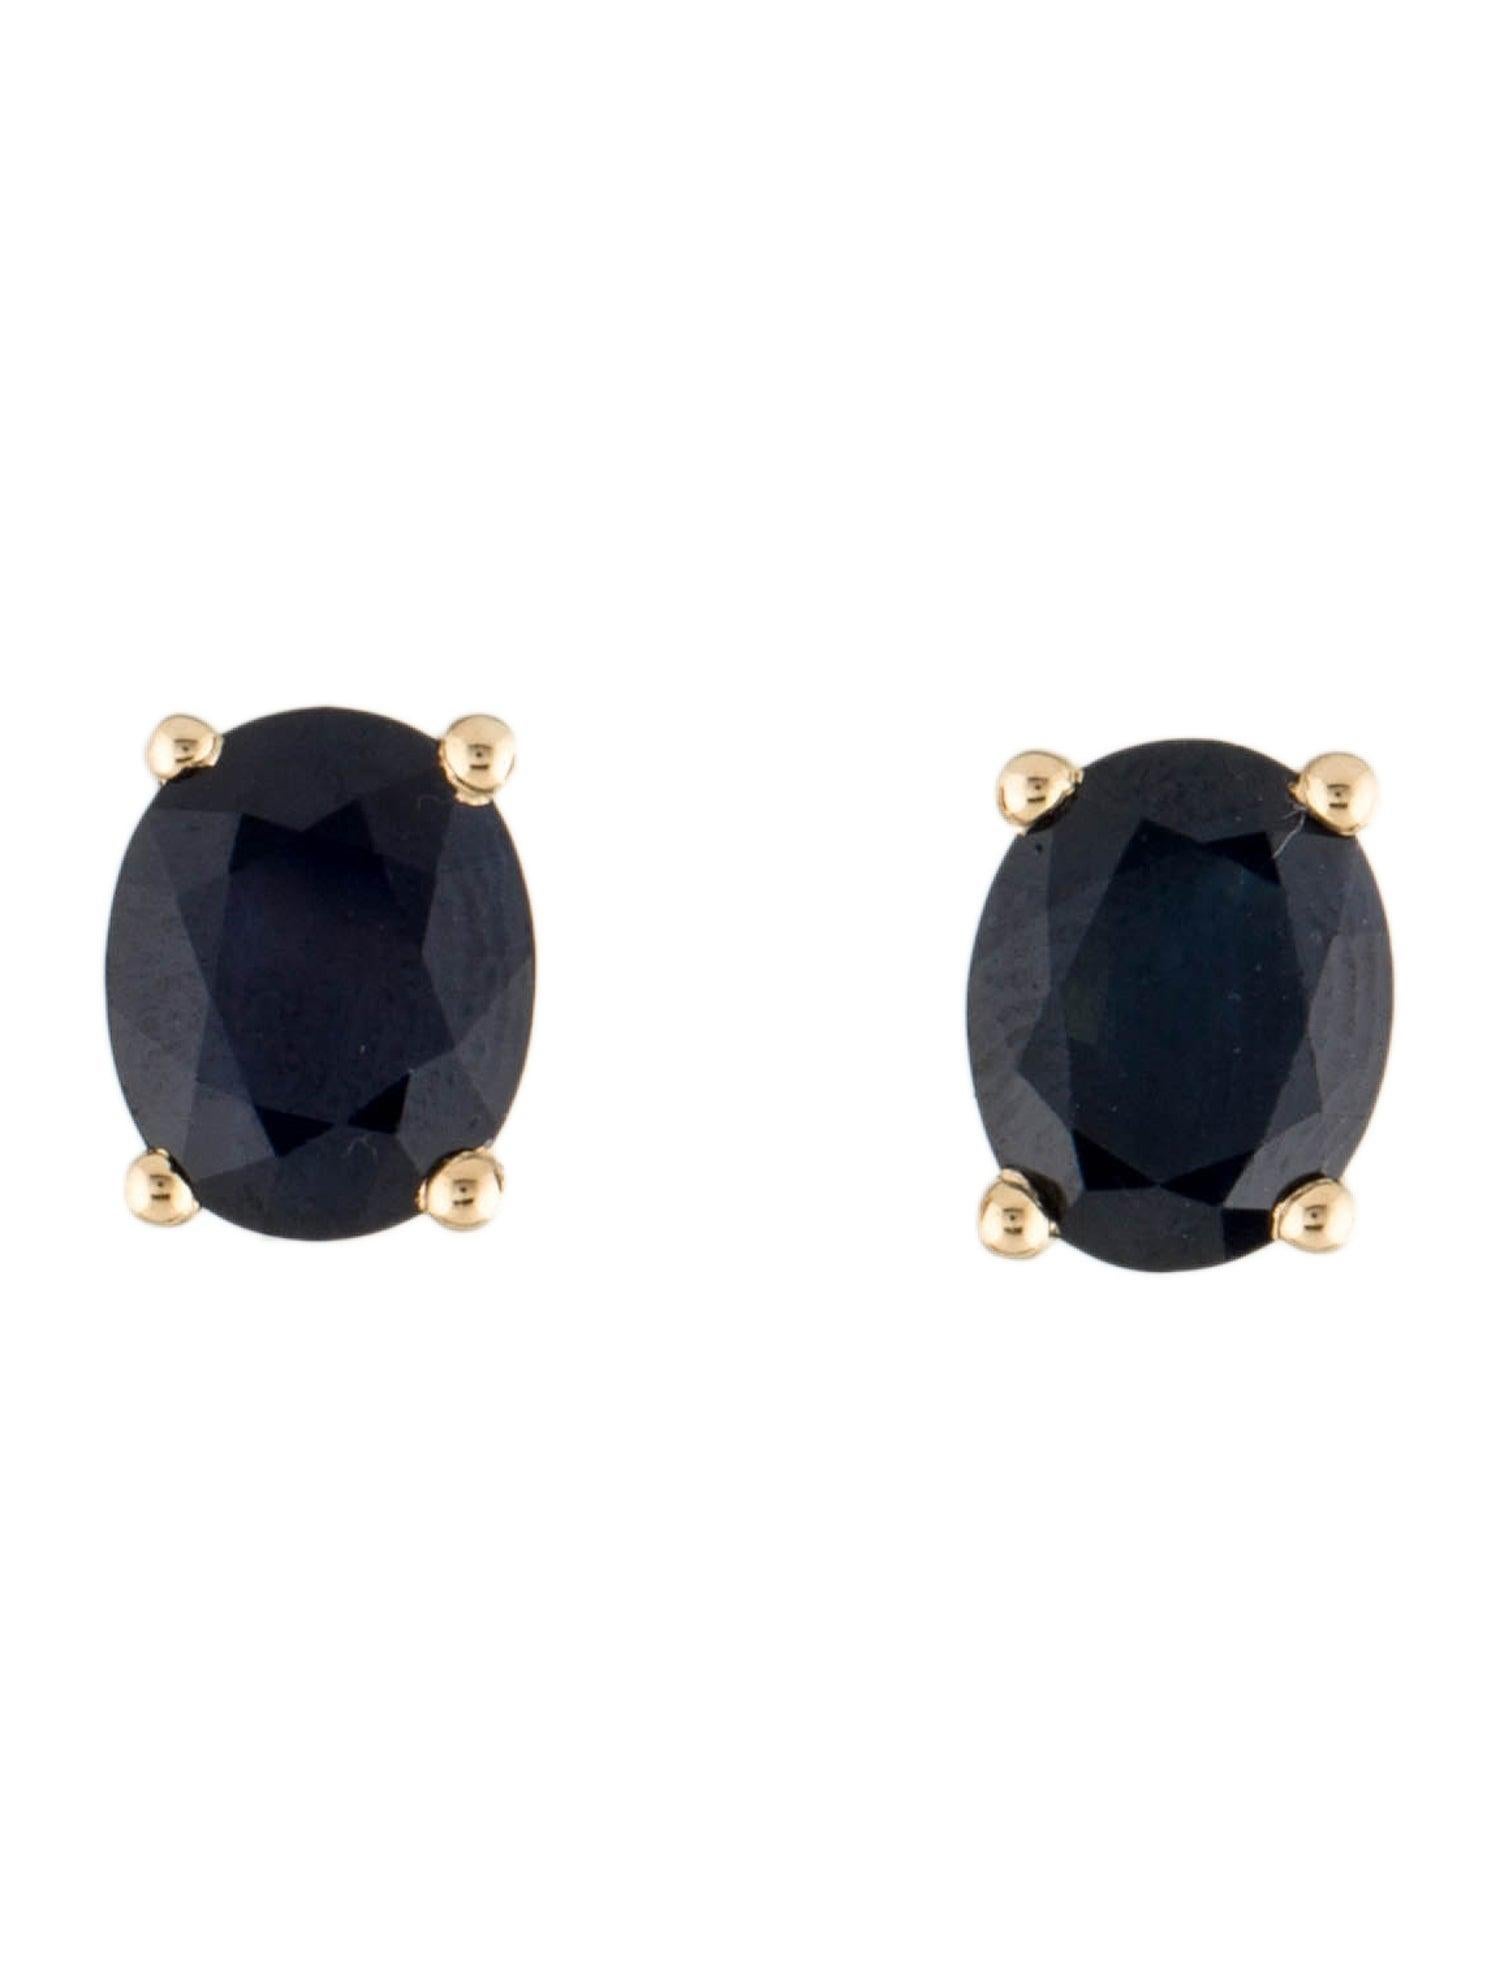 14K Sapphire Stud Earrings - Elegant Gemstone Jewelry, Timeless Classic Style In New Condition For Sale In Holtsville, NY